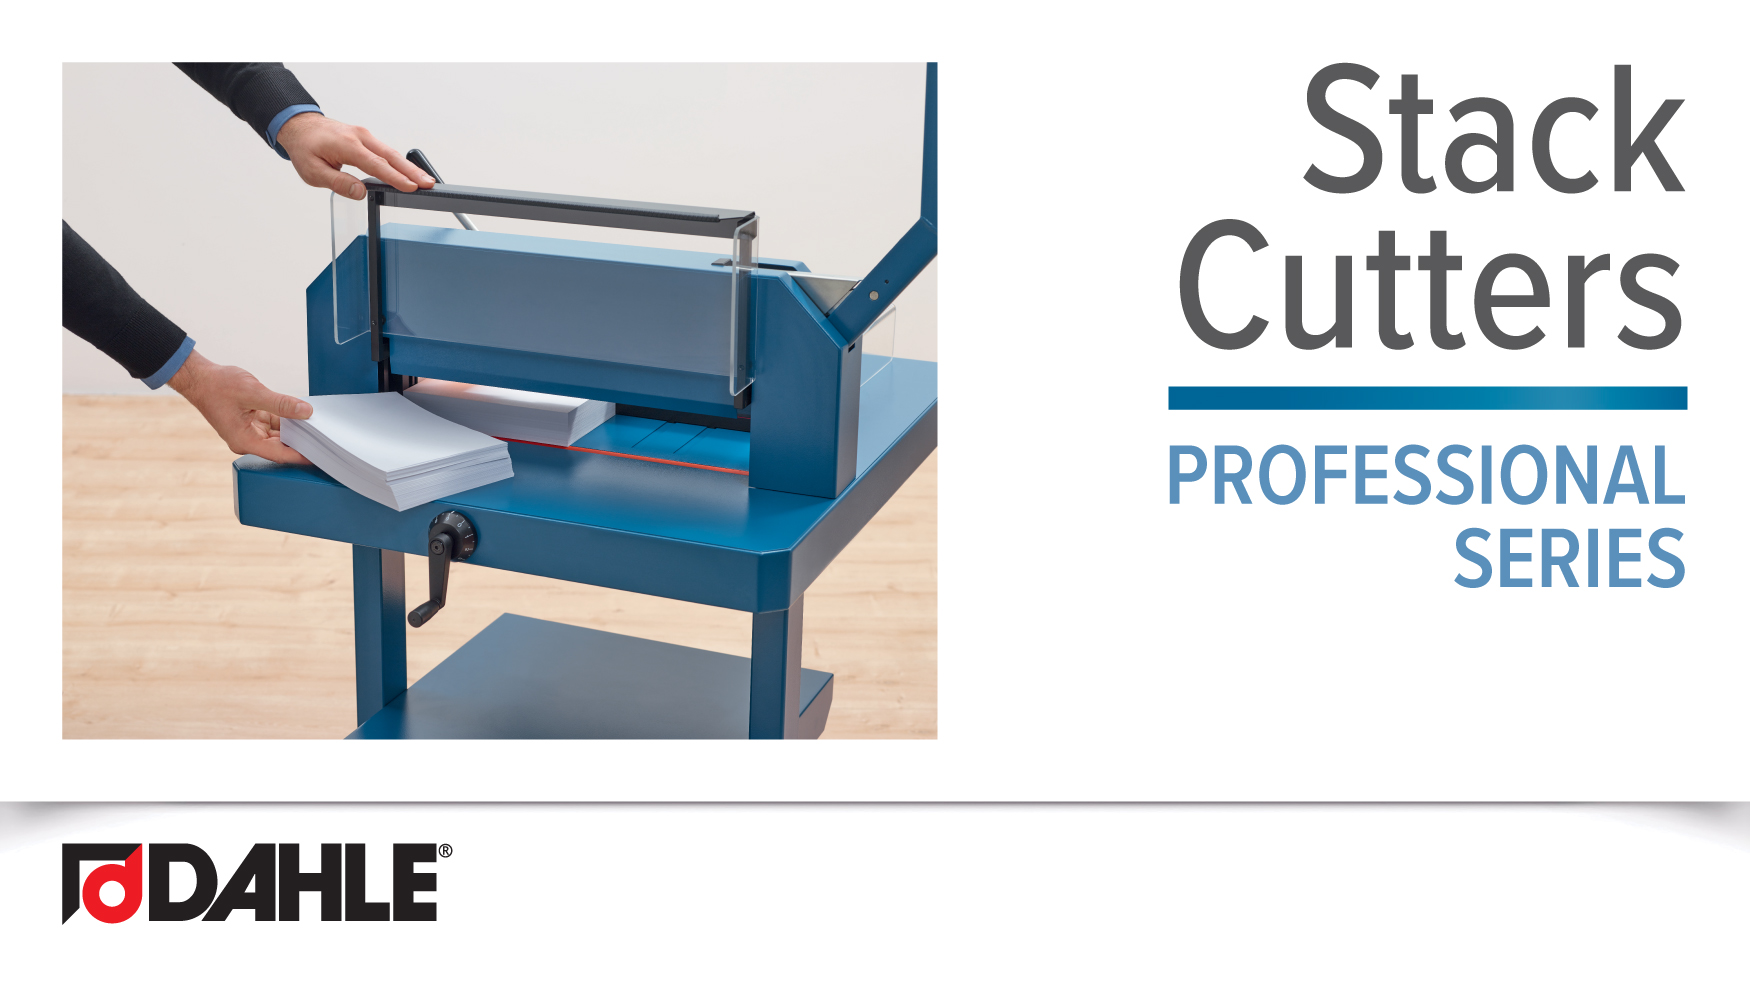 Dahle Professional Stack Cutter Series Video